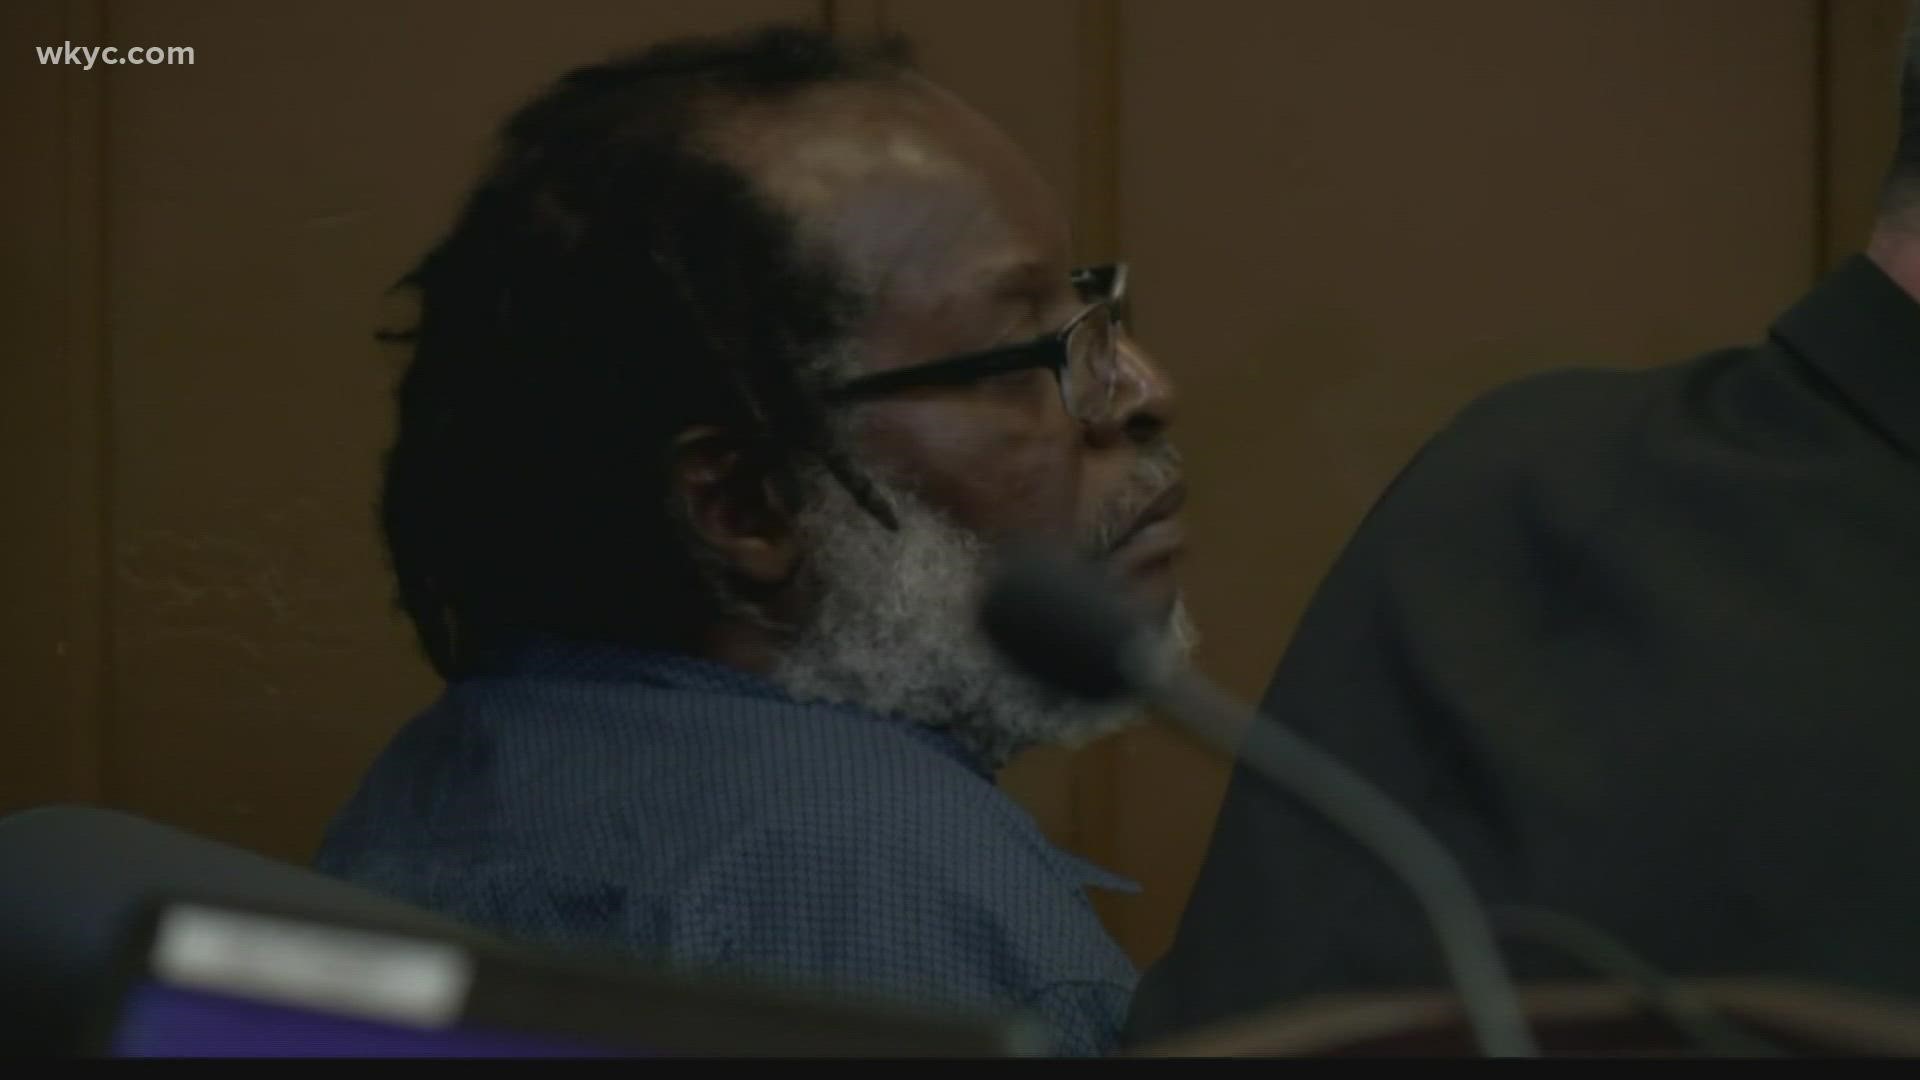 Stanley Ford could face the death penalty if convicted of multiple aggravated murder charges. Testimony is scheduled to begin on August 30.